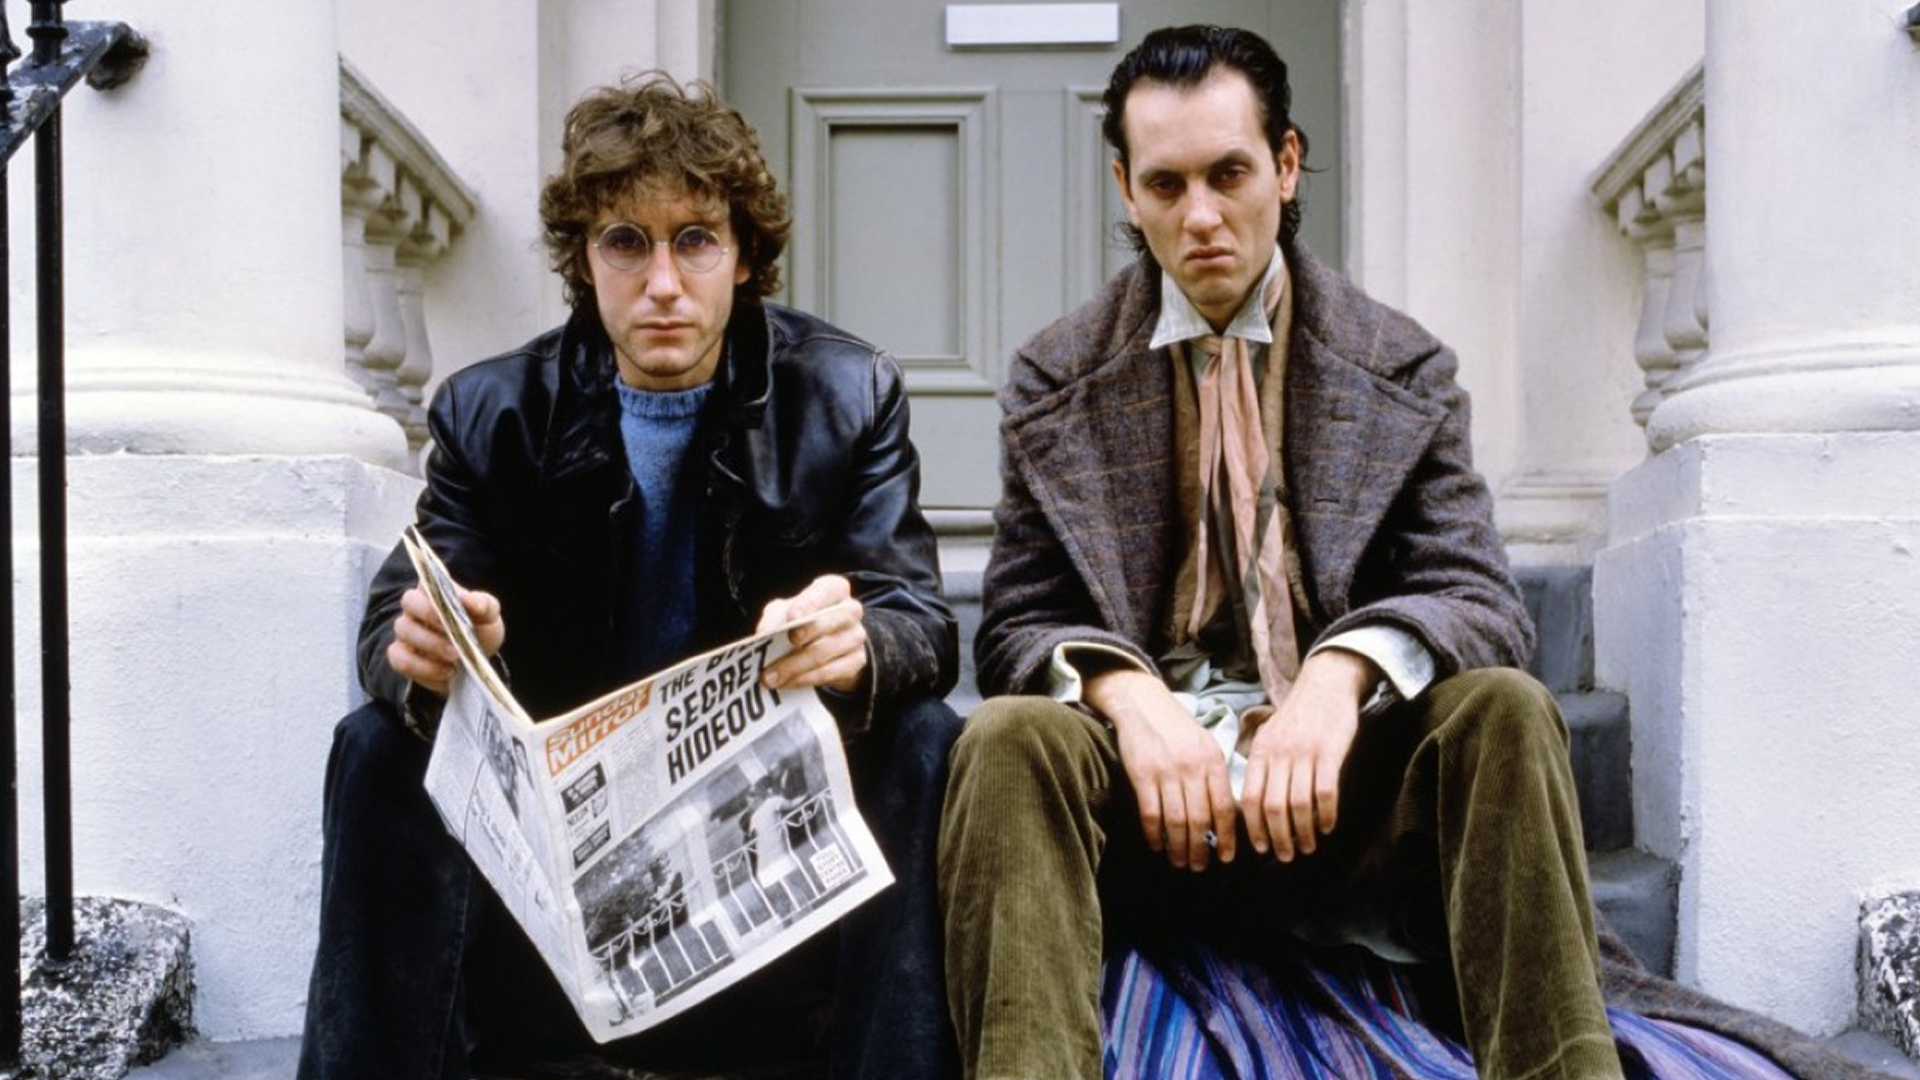 Withnail And I Backgrounds, Compatible - PC, Mobile, Gadgets| 1920x1080 px